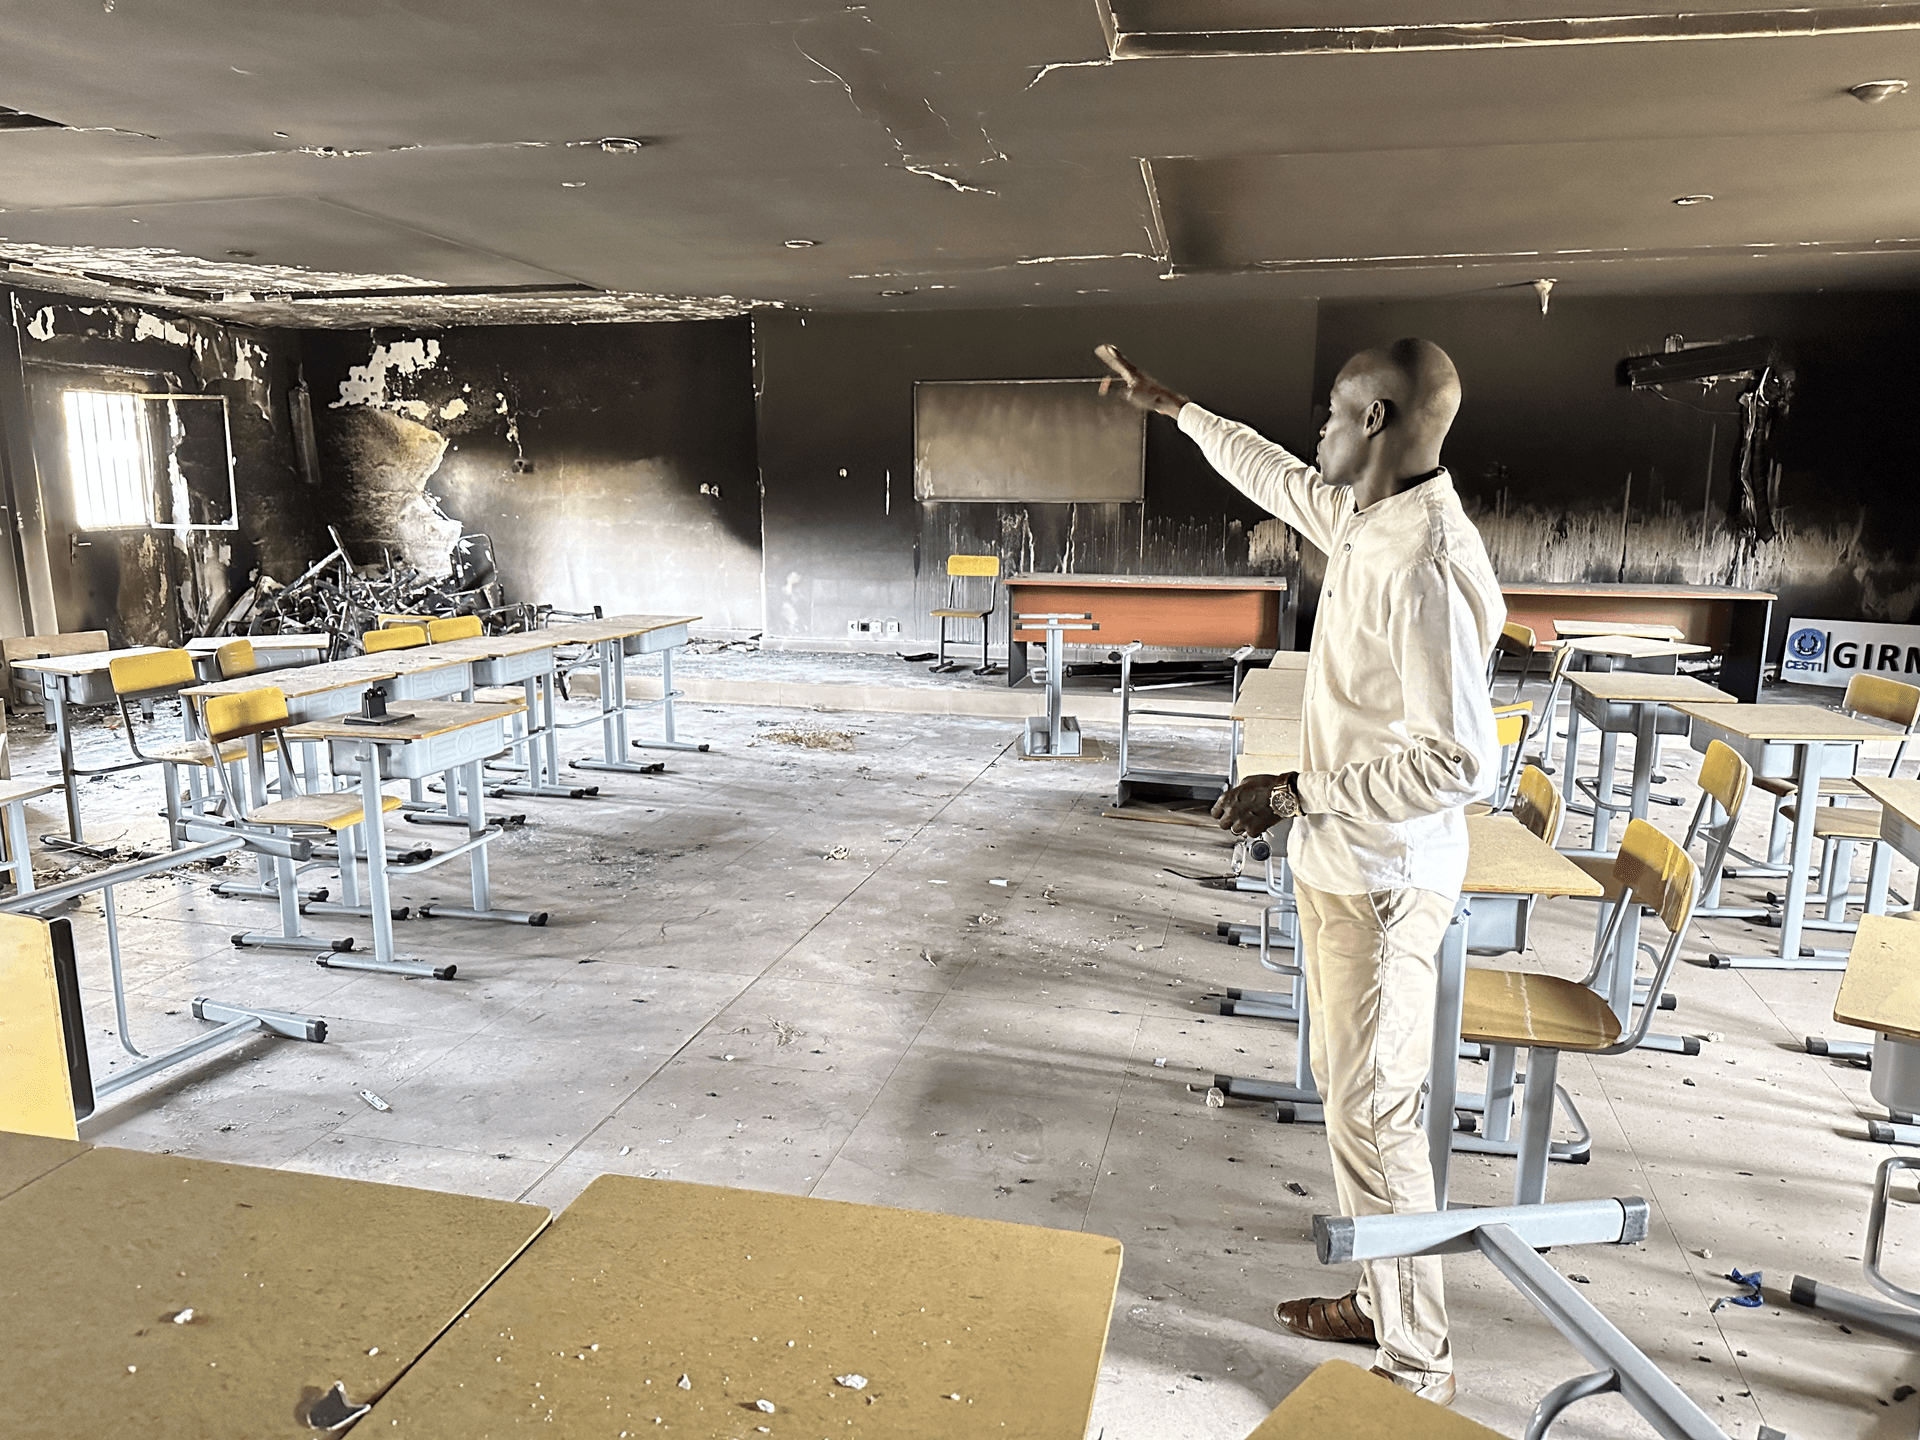 A man standing and showing a burned classroom